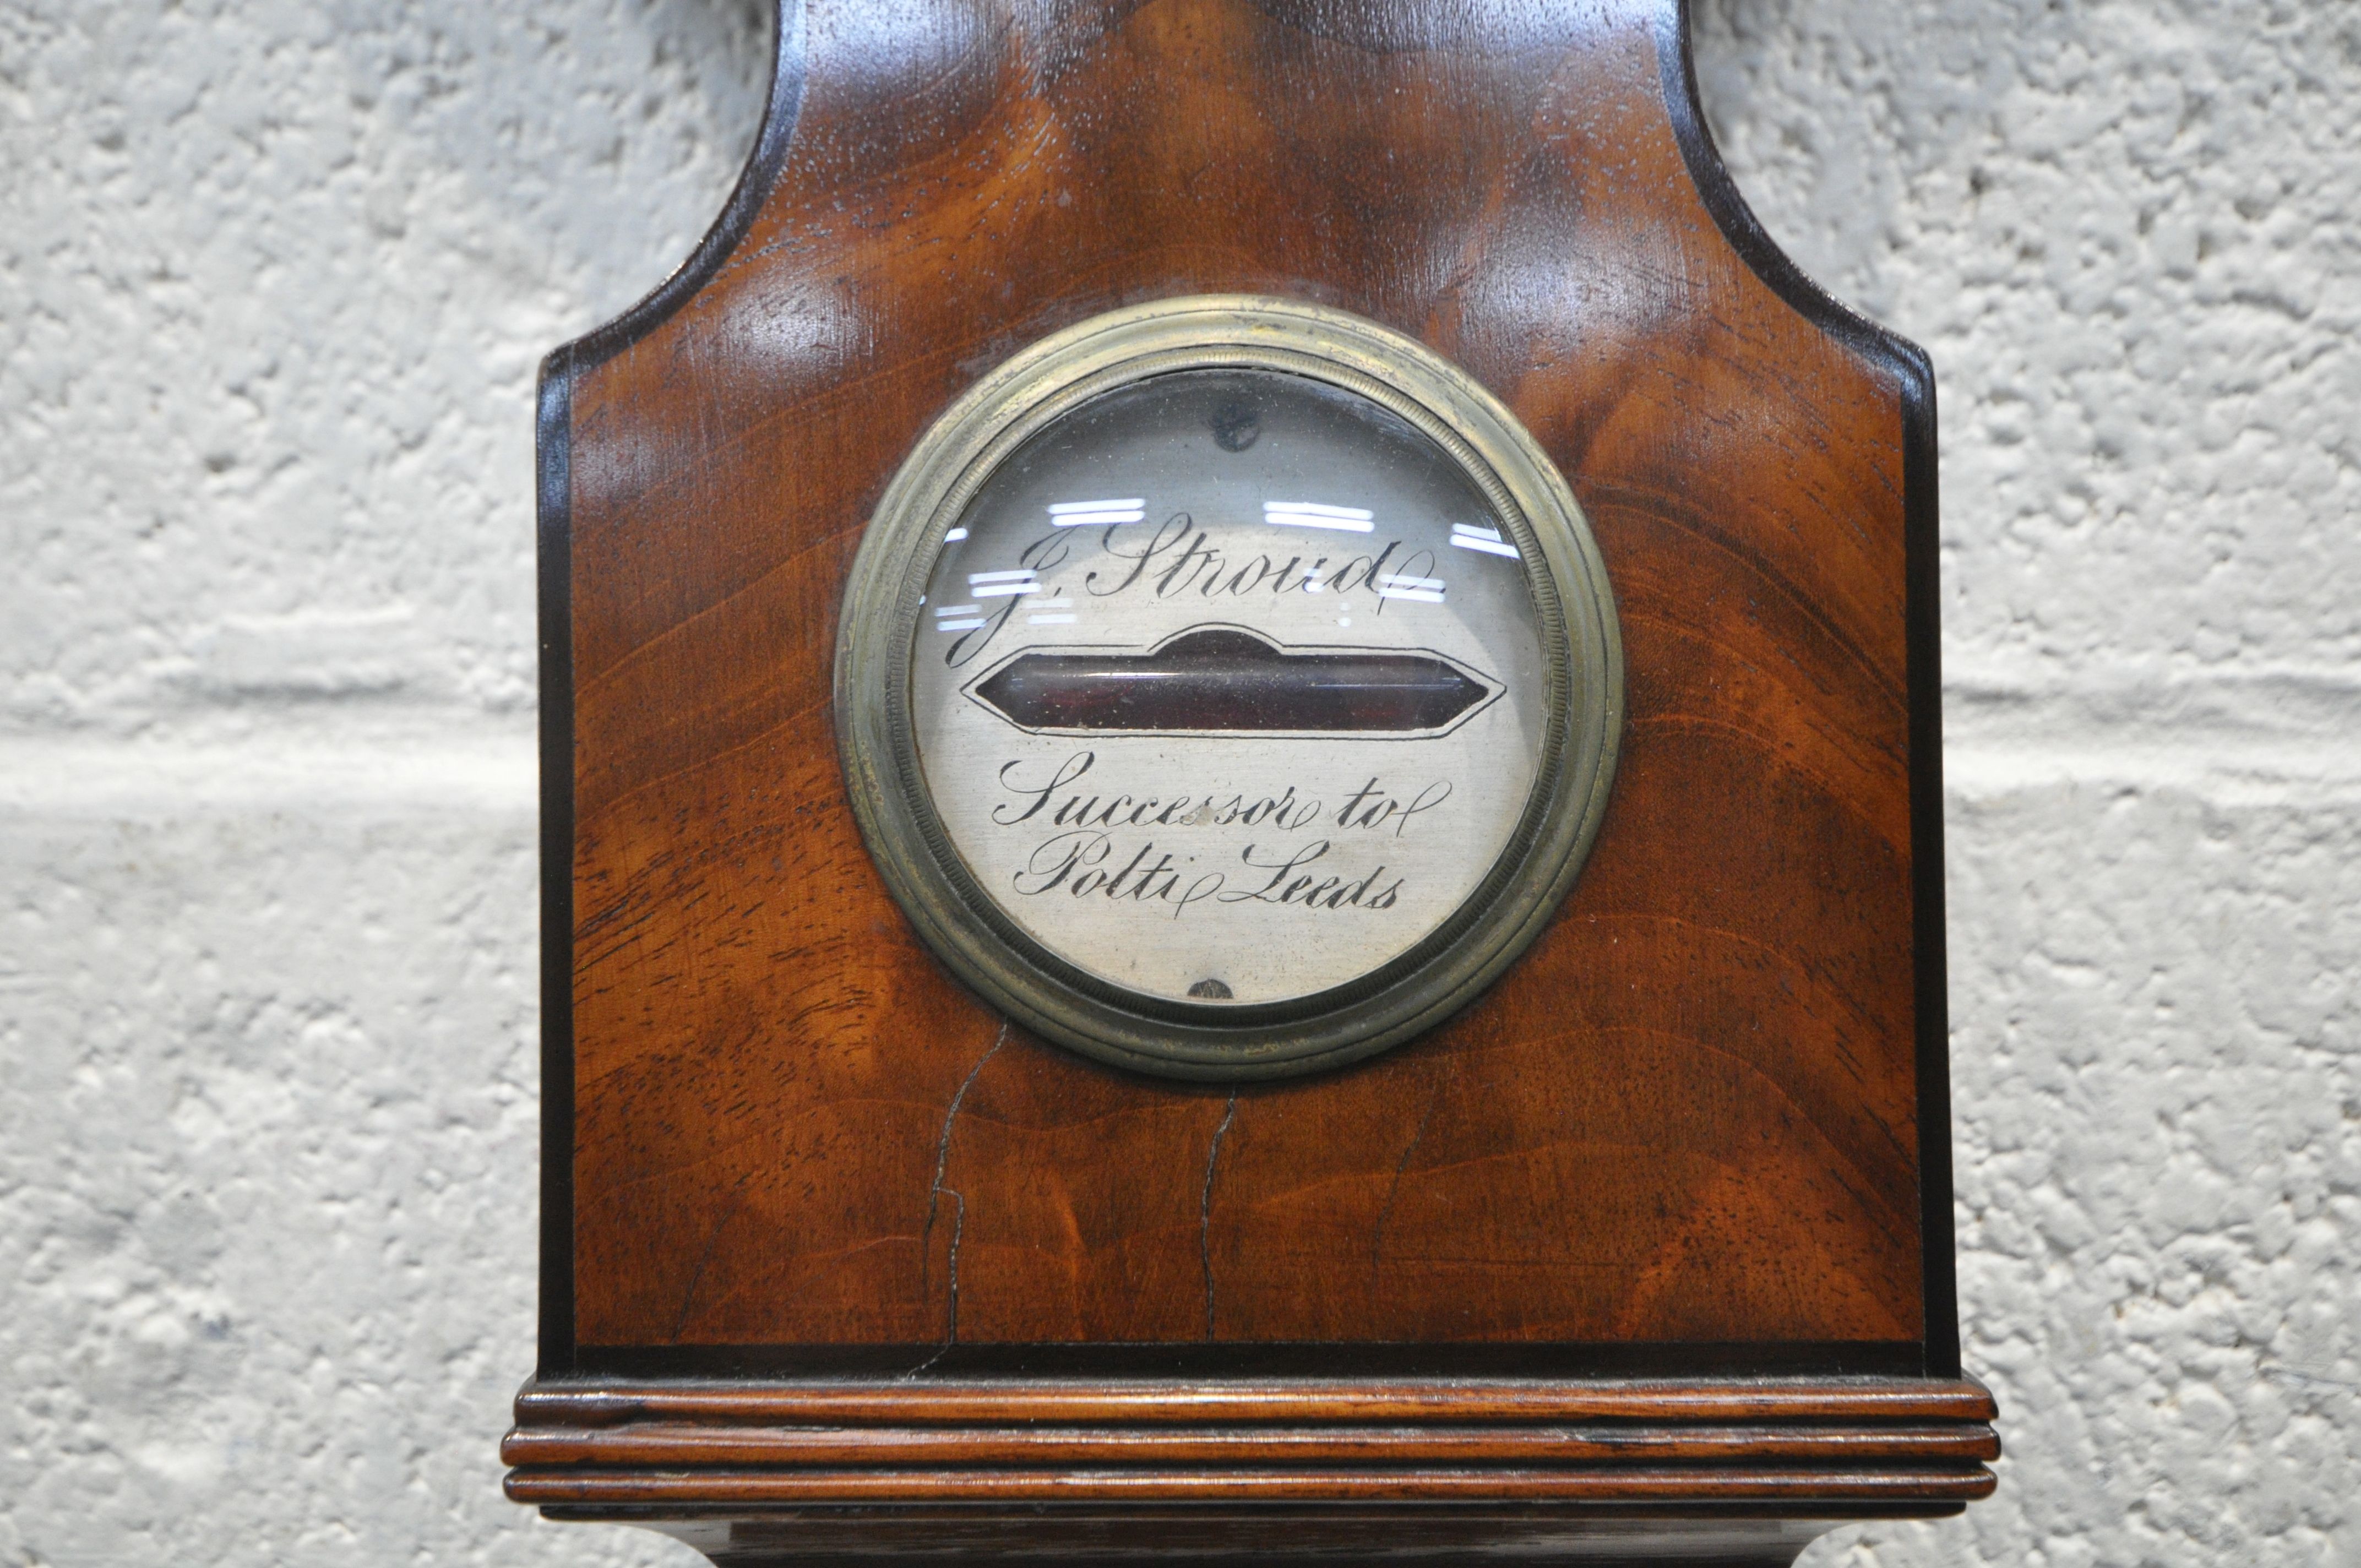 A 19TH CENTURY J STROUD MAHOGANY BANJO BAROMETER, with a dry/damp dial, a thermometer, a large - Image 5 of 5